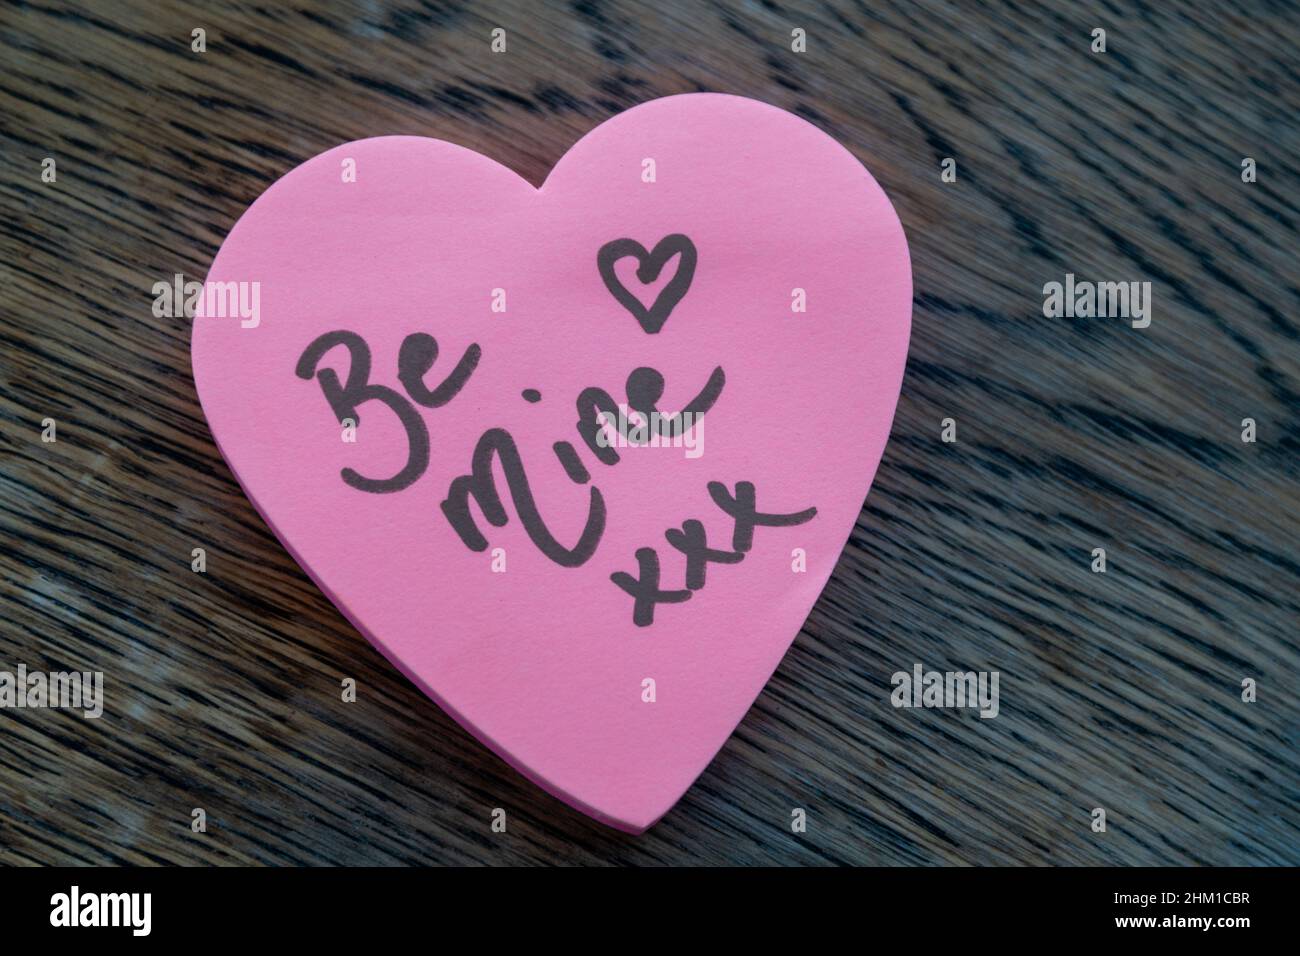 Be Mine hand wrote text on pink love heart with drawn hearts. On rustic wooden background. Love Valentines concept. Stock Photo